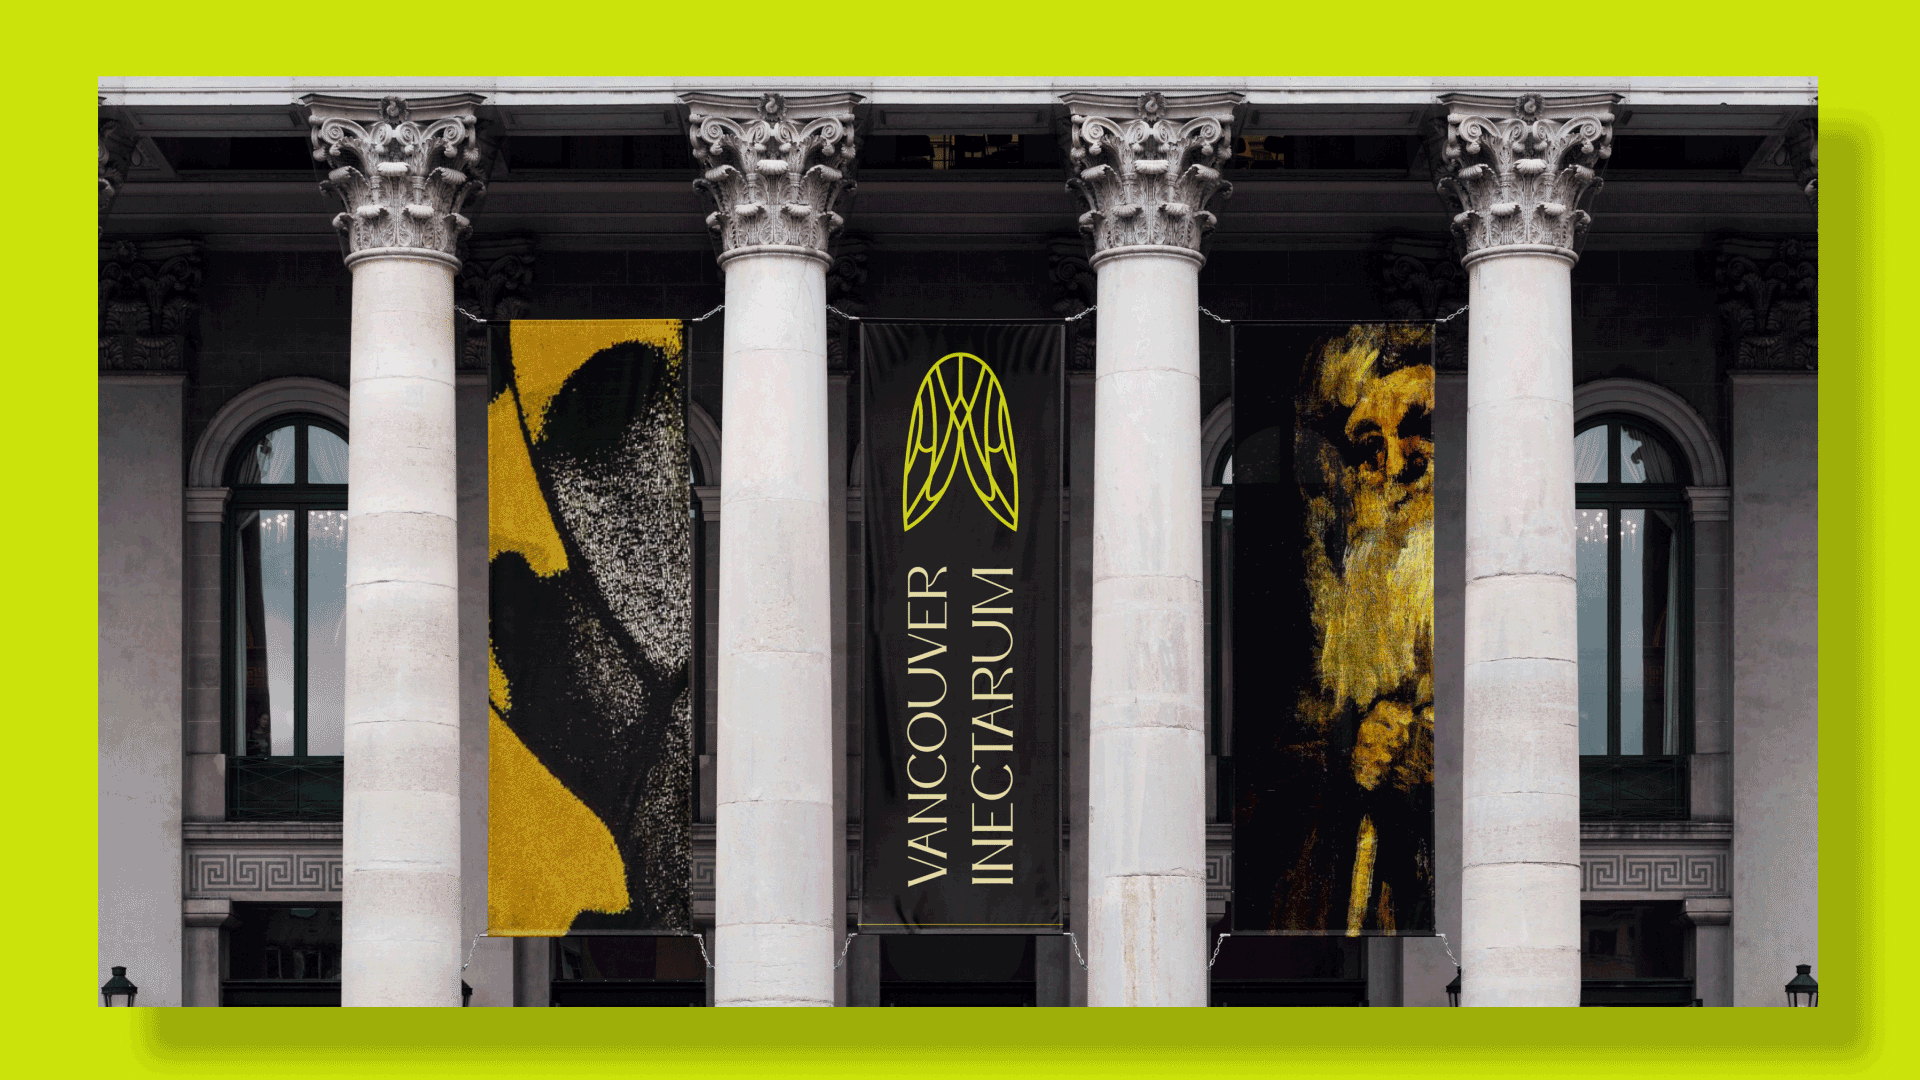 3 banners hanging between museum columns showing a close-up of an insect, a logo, and a close-up of a painting.